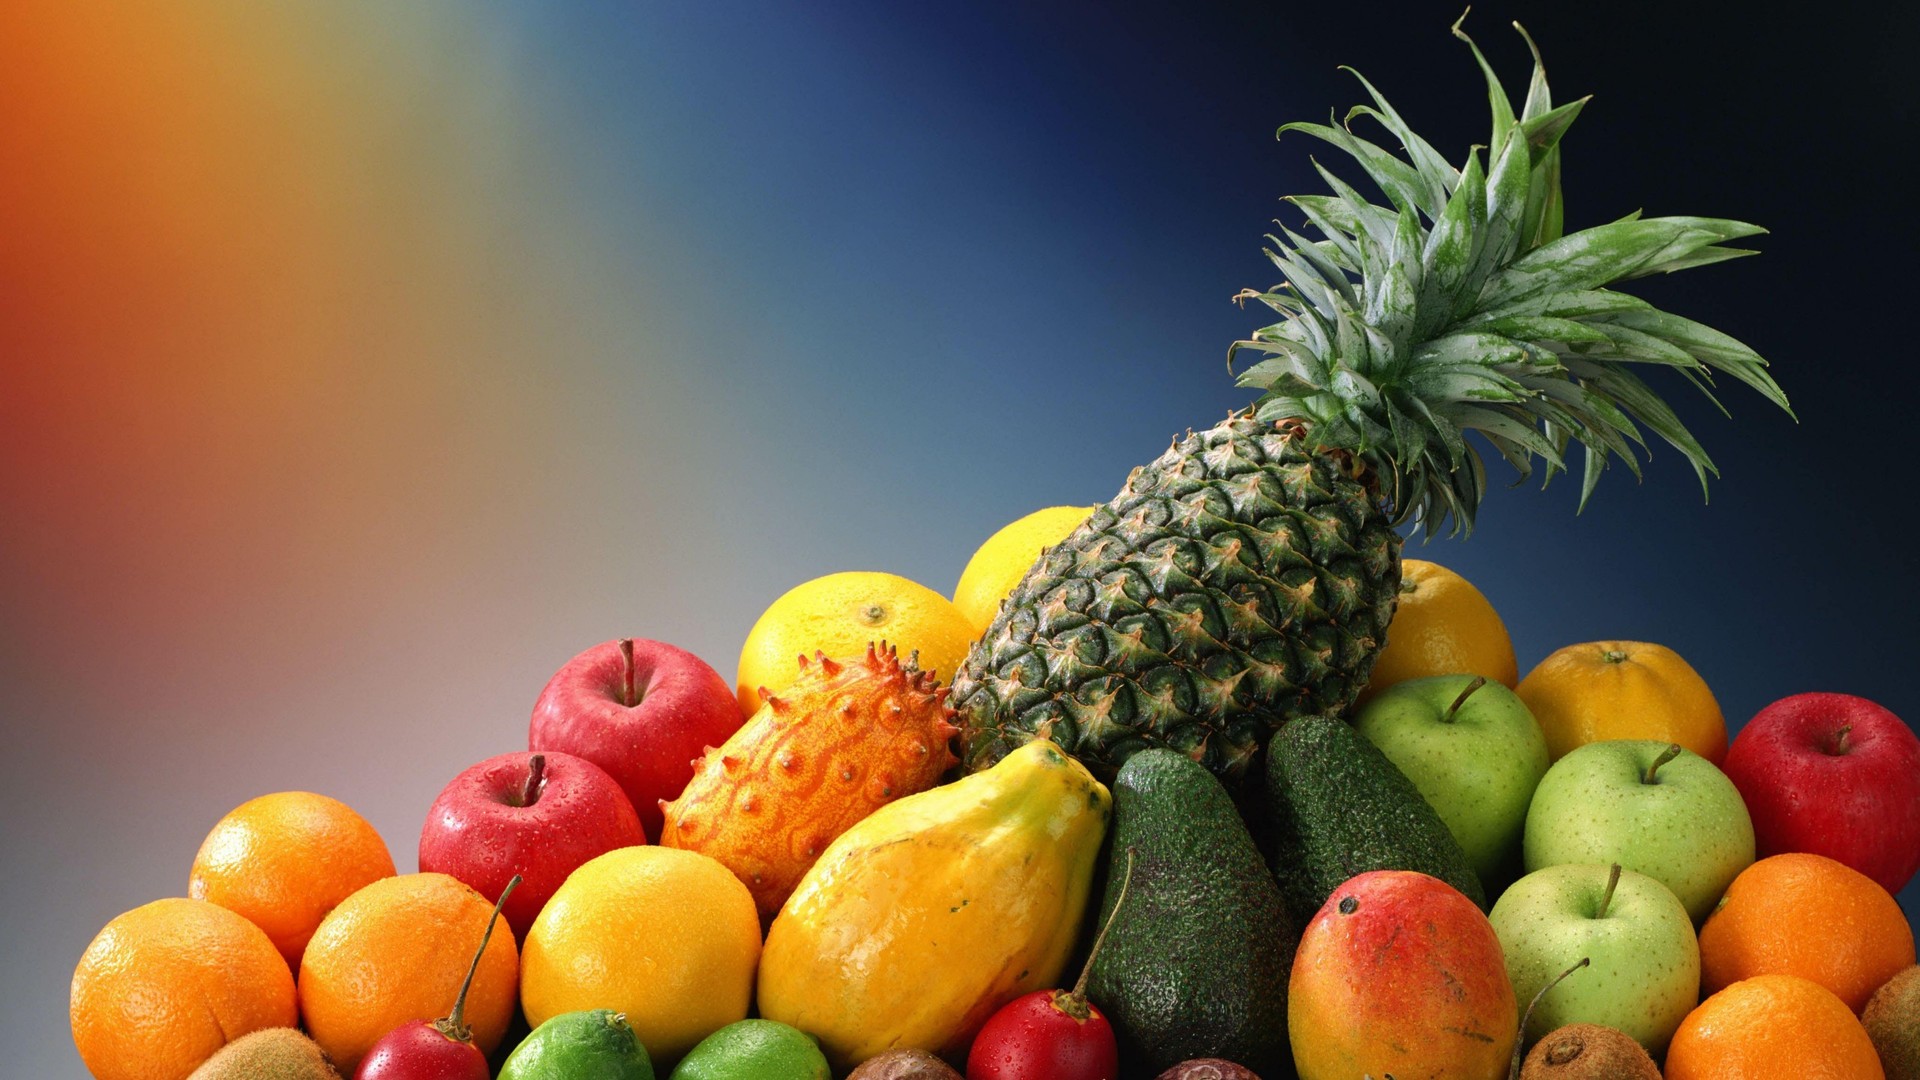 Related Post "Tropical fruit wallpaper"